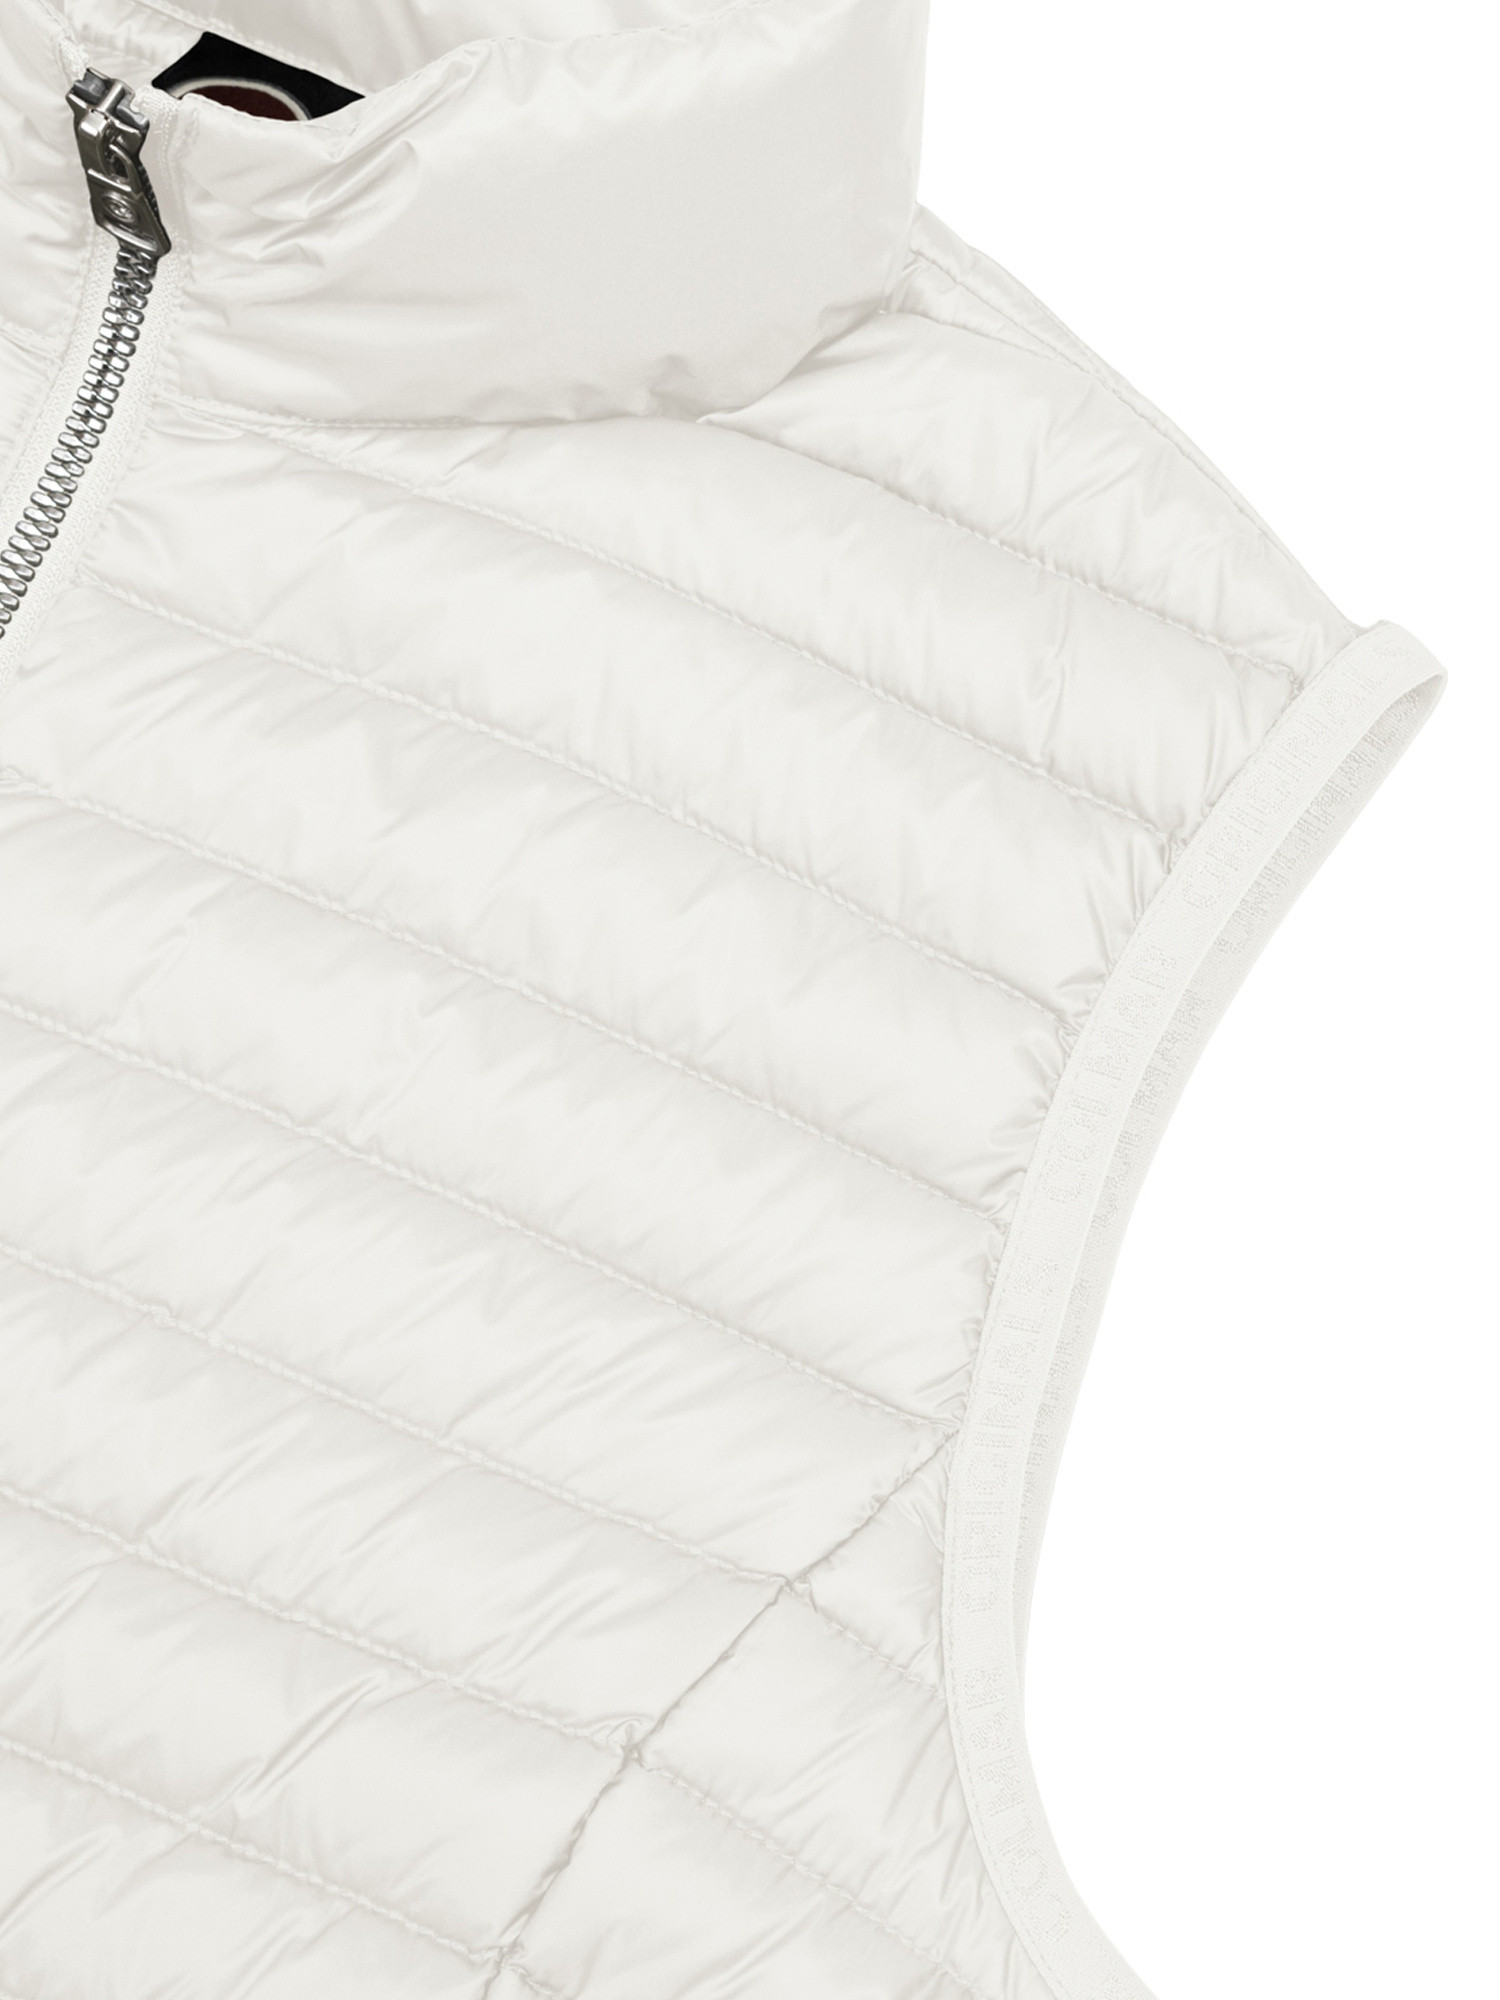 Colmar - Quilted gilet, White, large image number 2